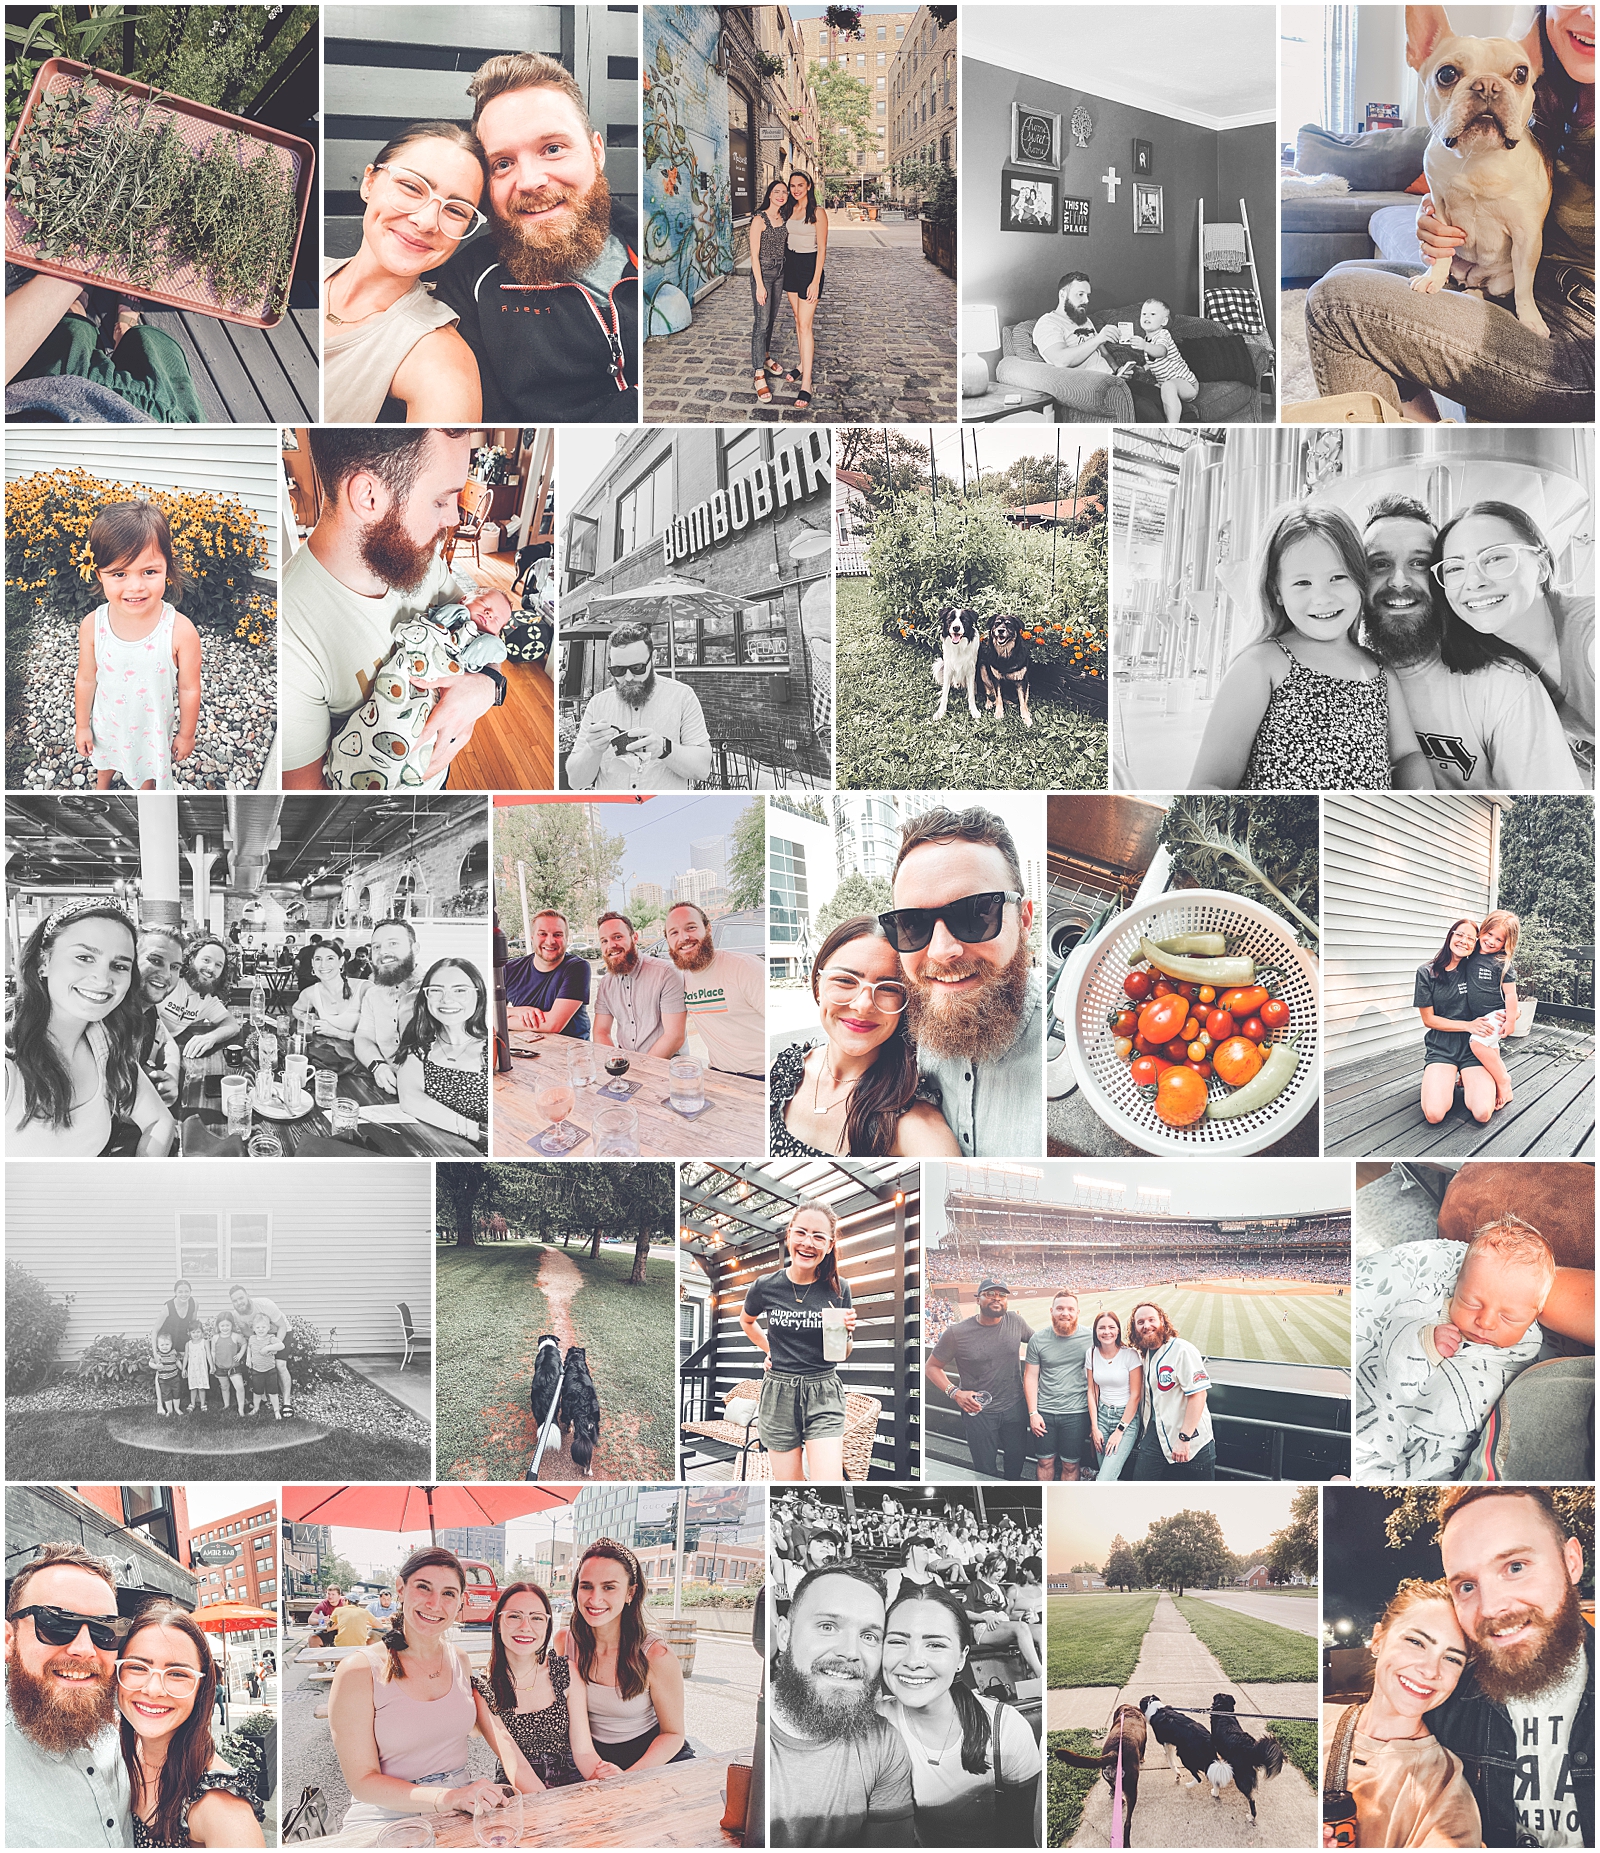 A look at the July 2021 My Life Mondays monthly blog recap with Chicagoland wedding photographer and mentor Kara Evans Photographer.